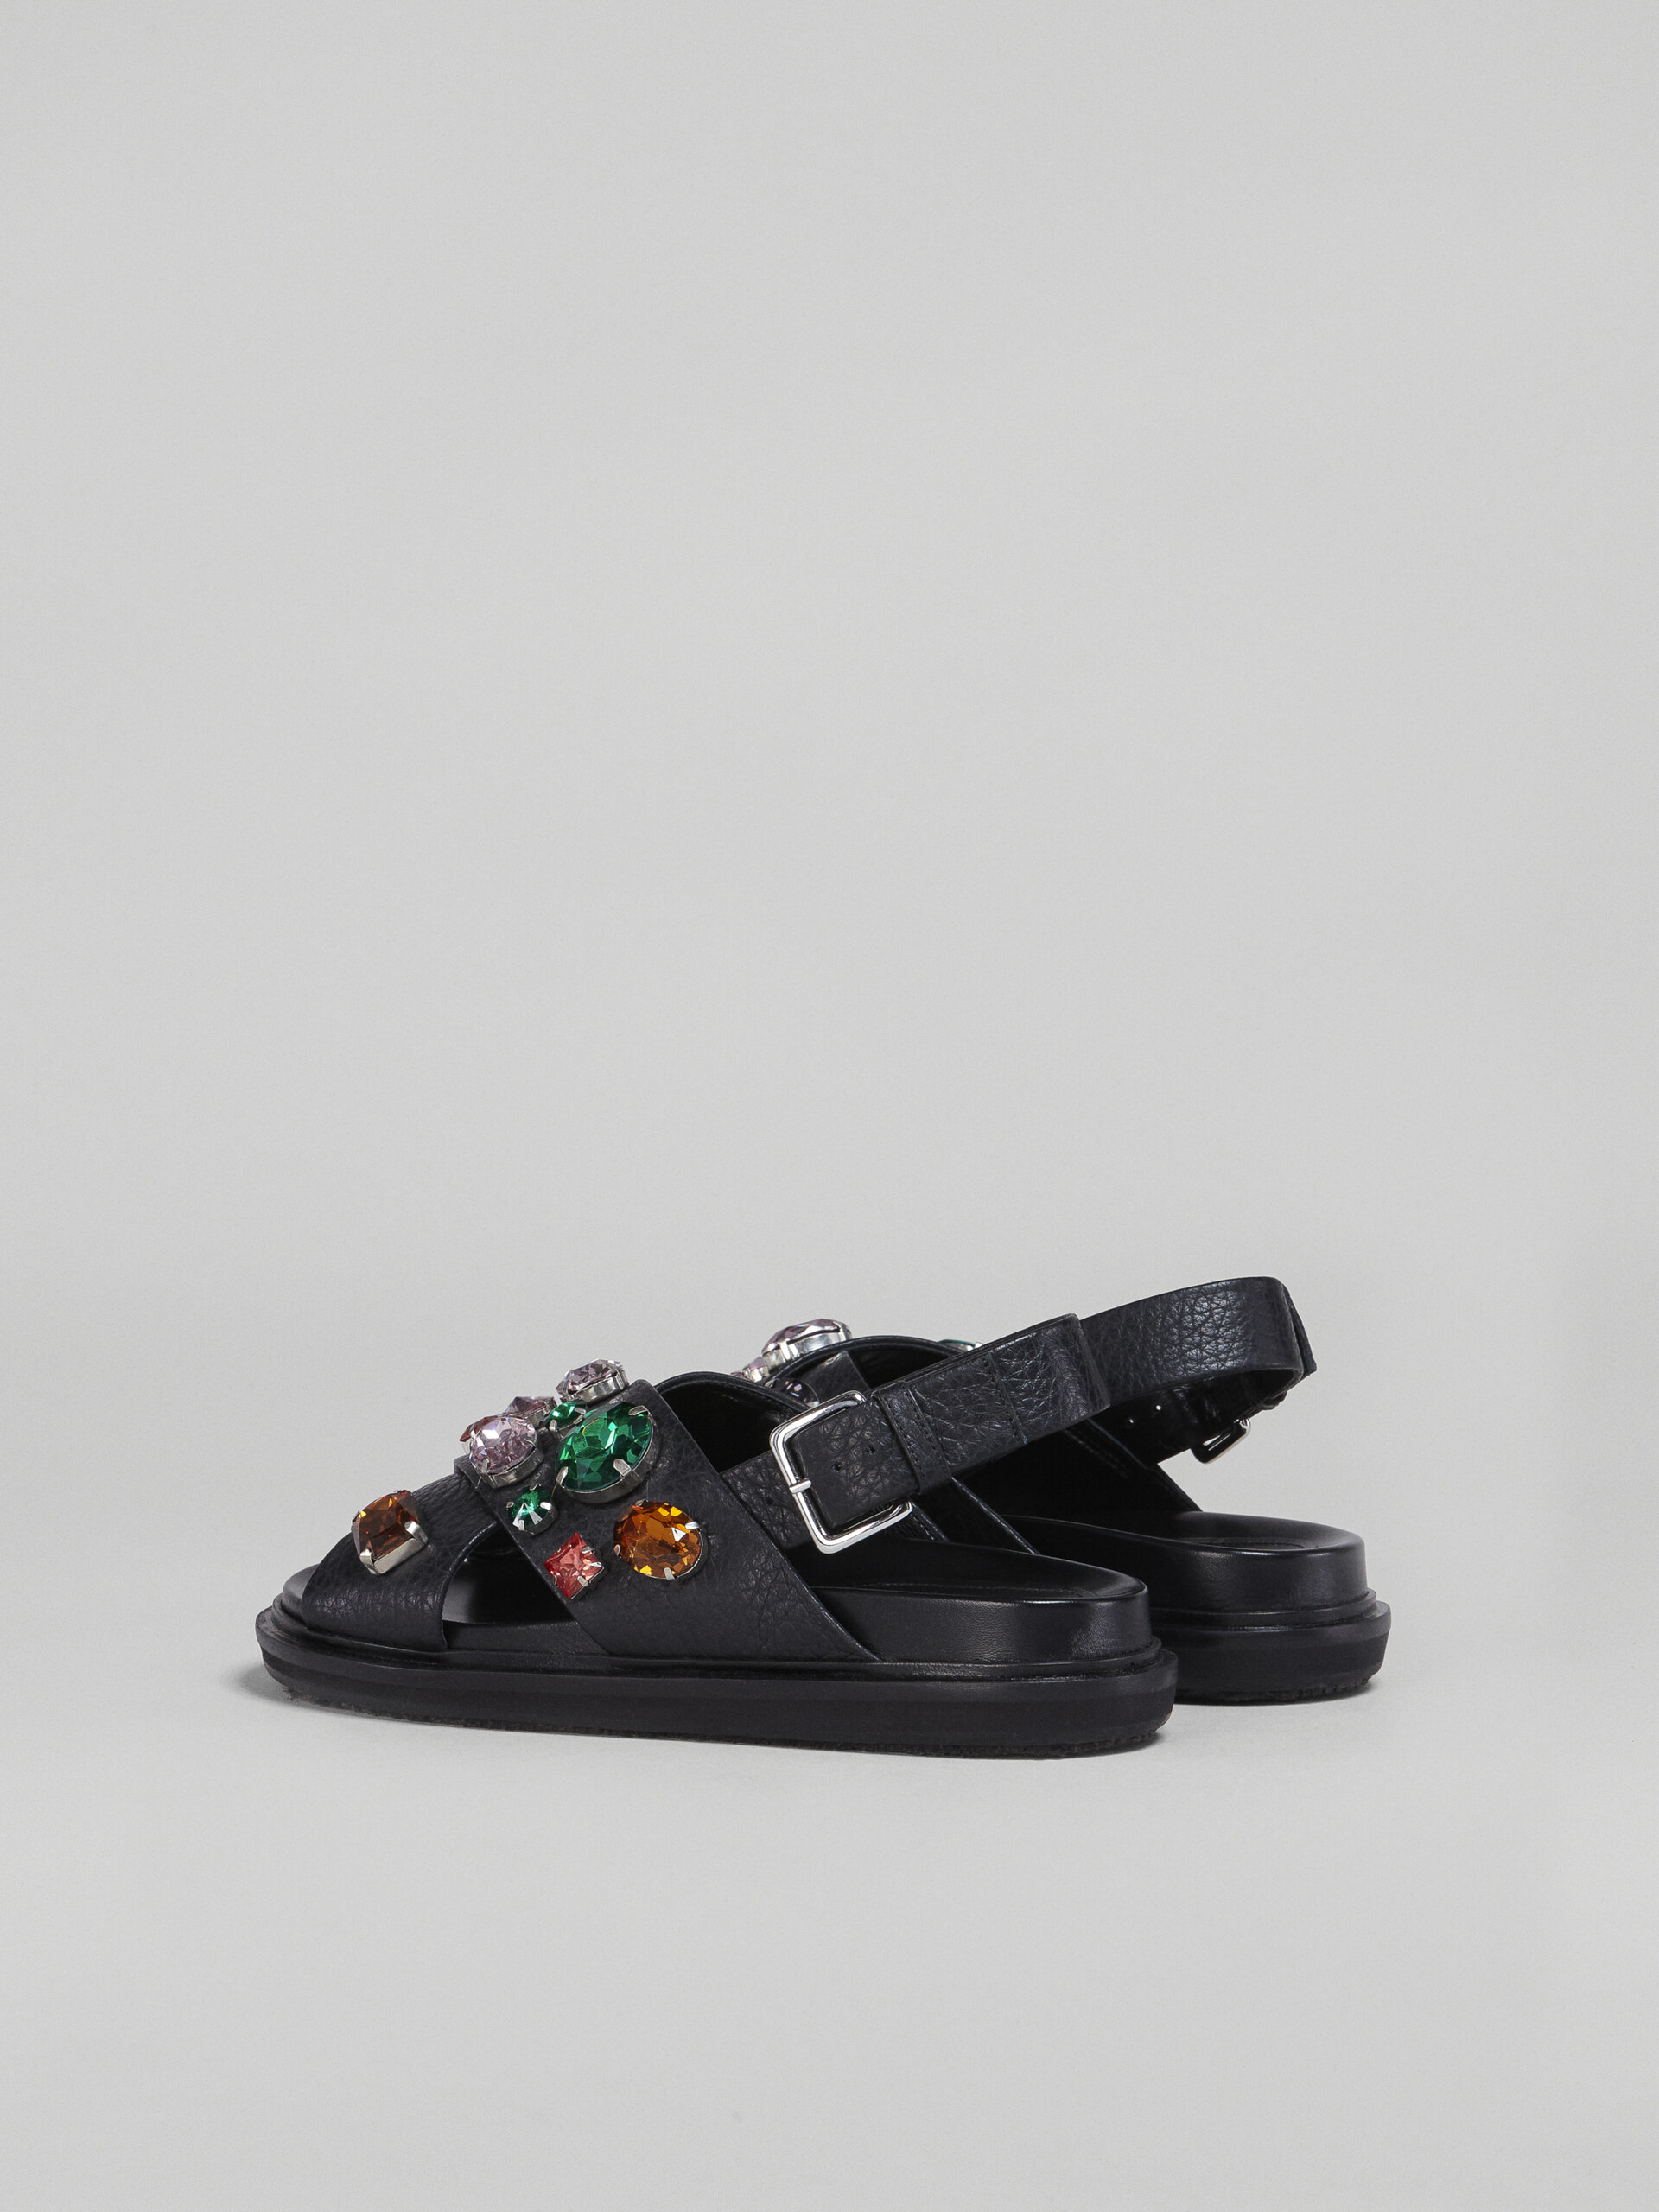 Black leather Fussbett with glass beads - Sandals - Image 3